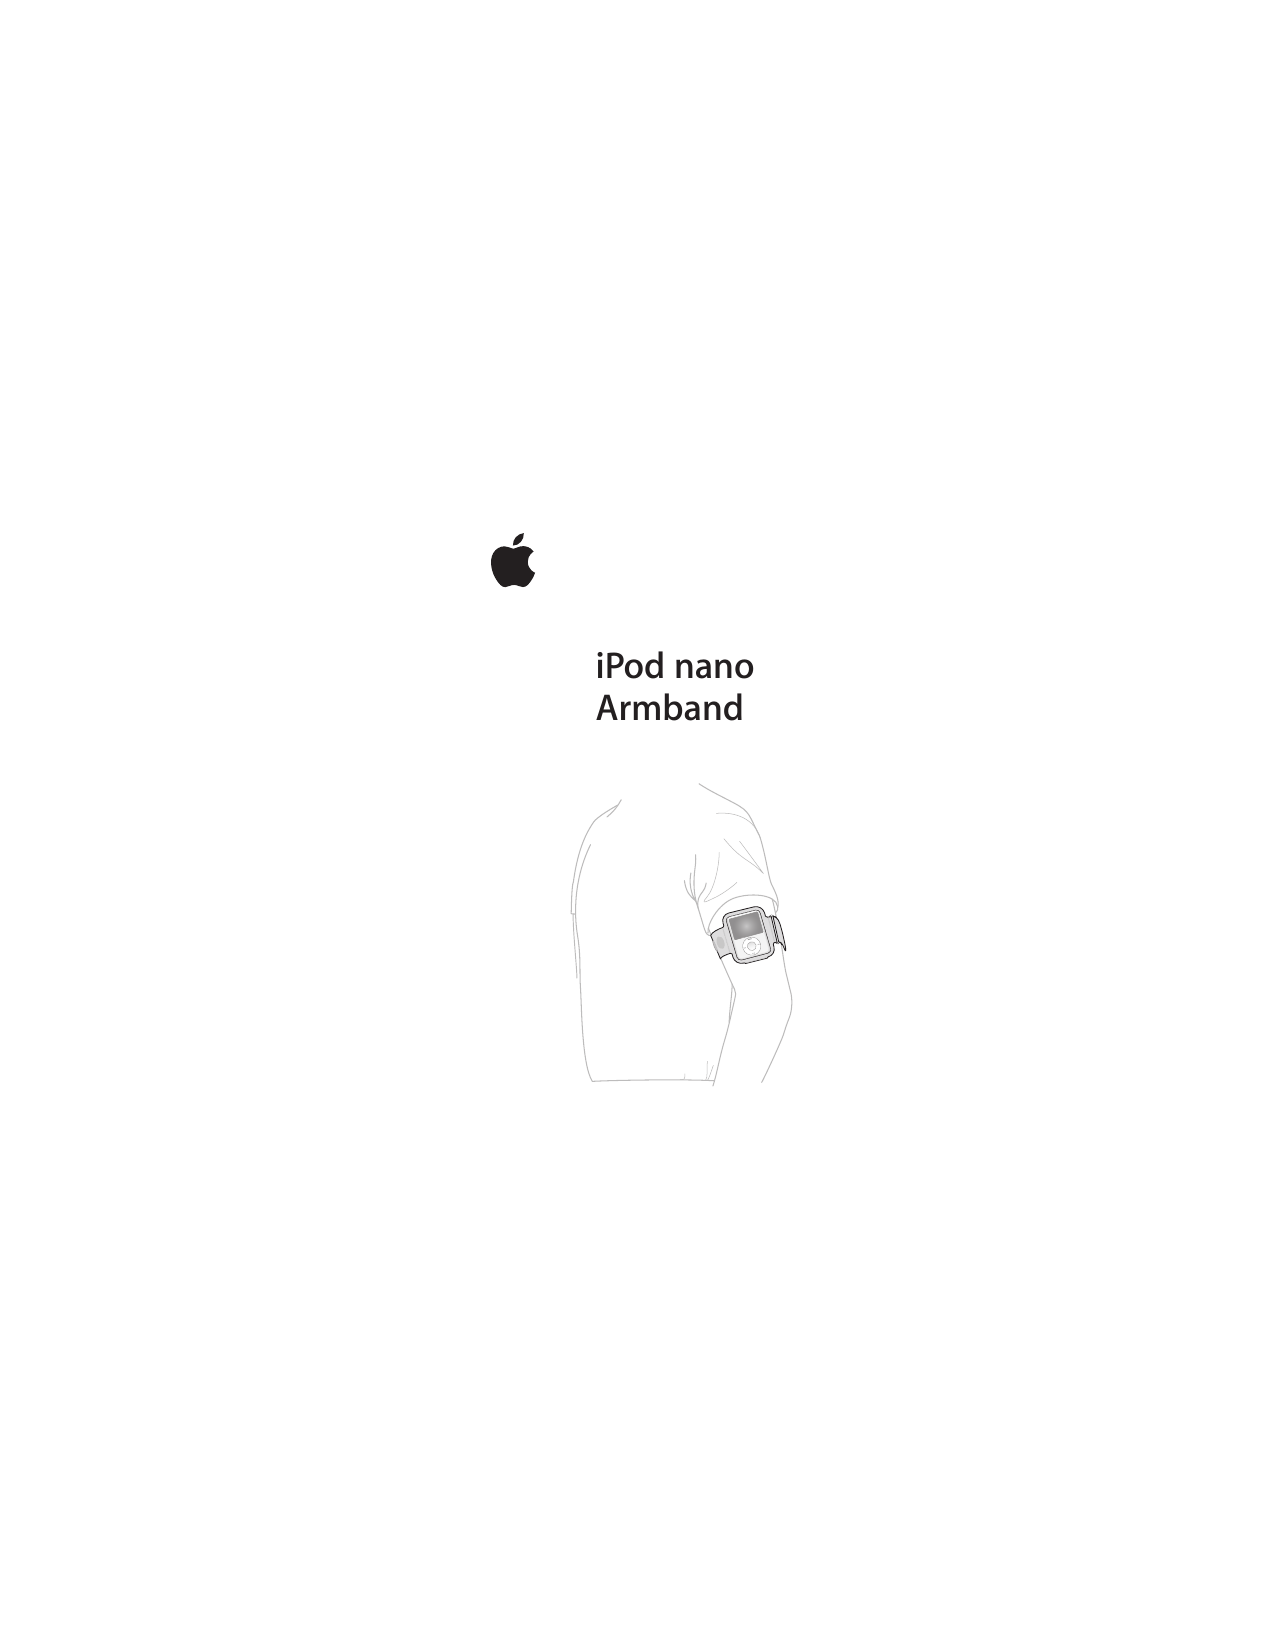 Page 1 of 8 - Apple IPod Accessories Nano Armband User Manual I Pod (3rd Generation) - 3rd Gen